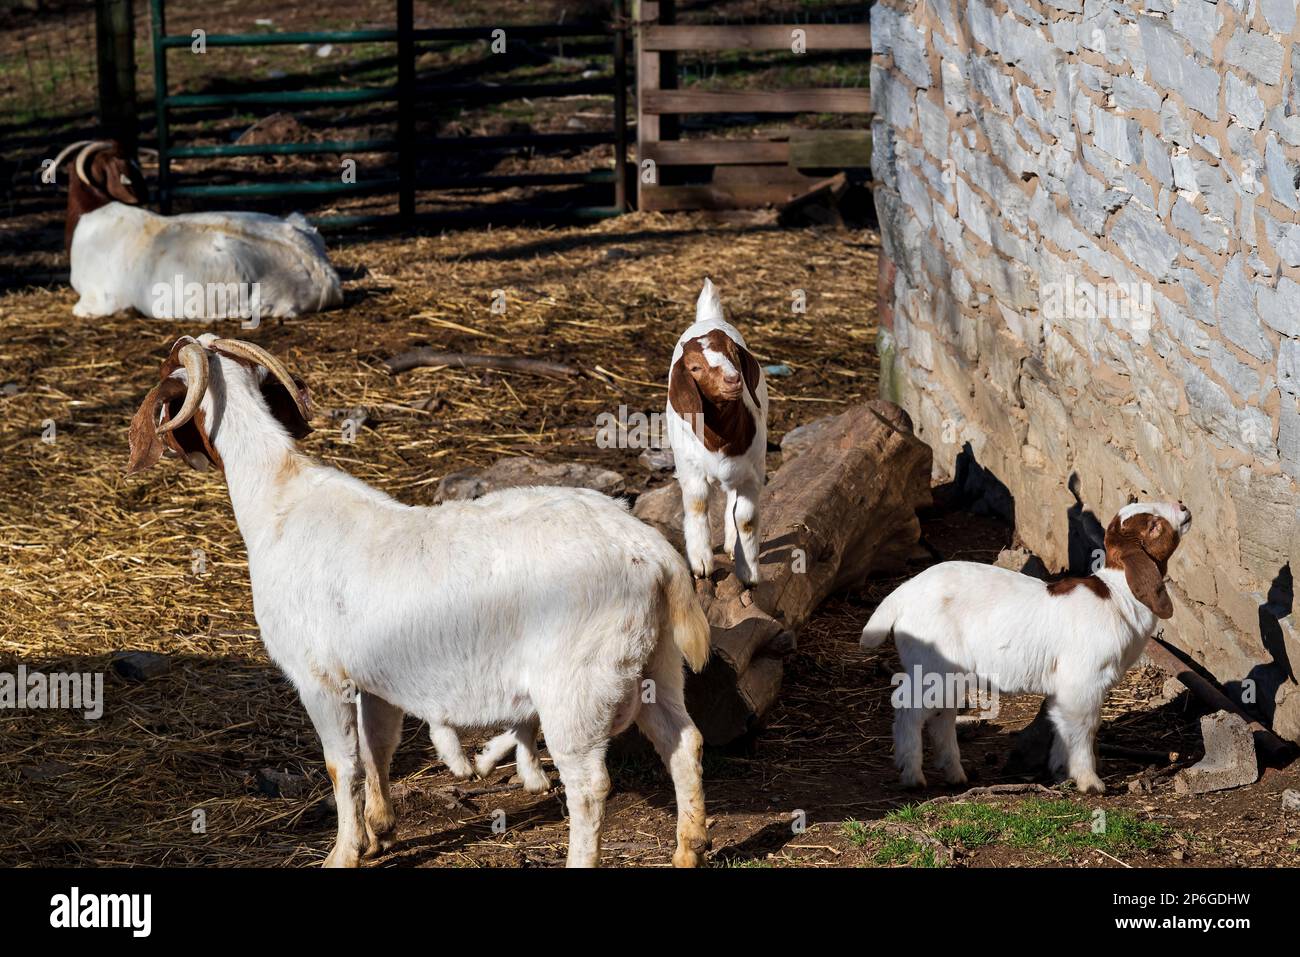 Boer goats with babies in a barnyard. This breed of goat was developed in South Africa in the 1900s for meat production. Stock Photo